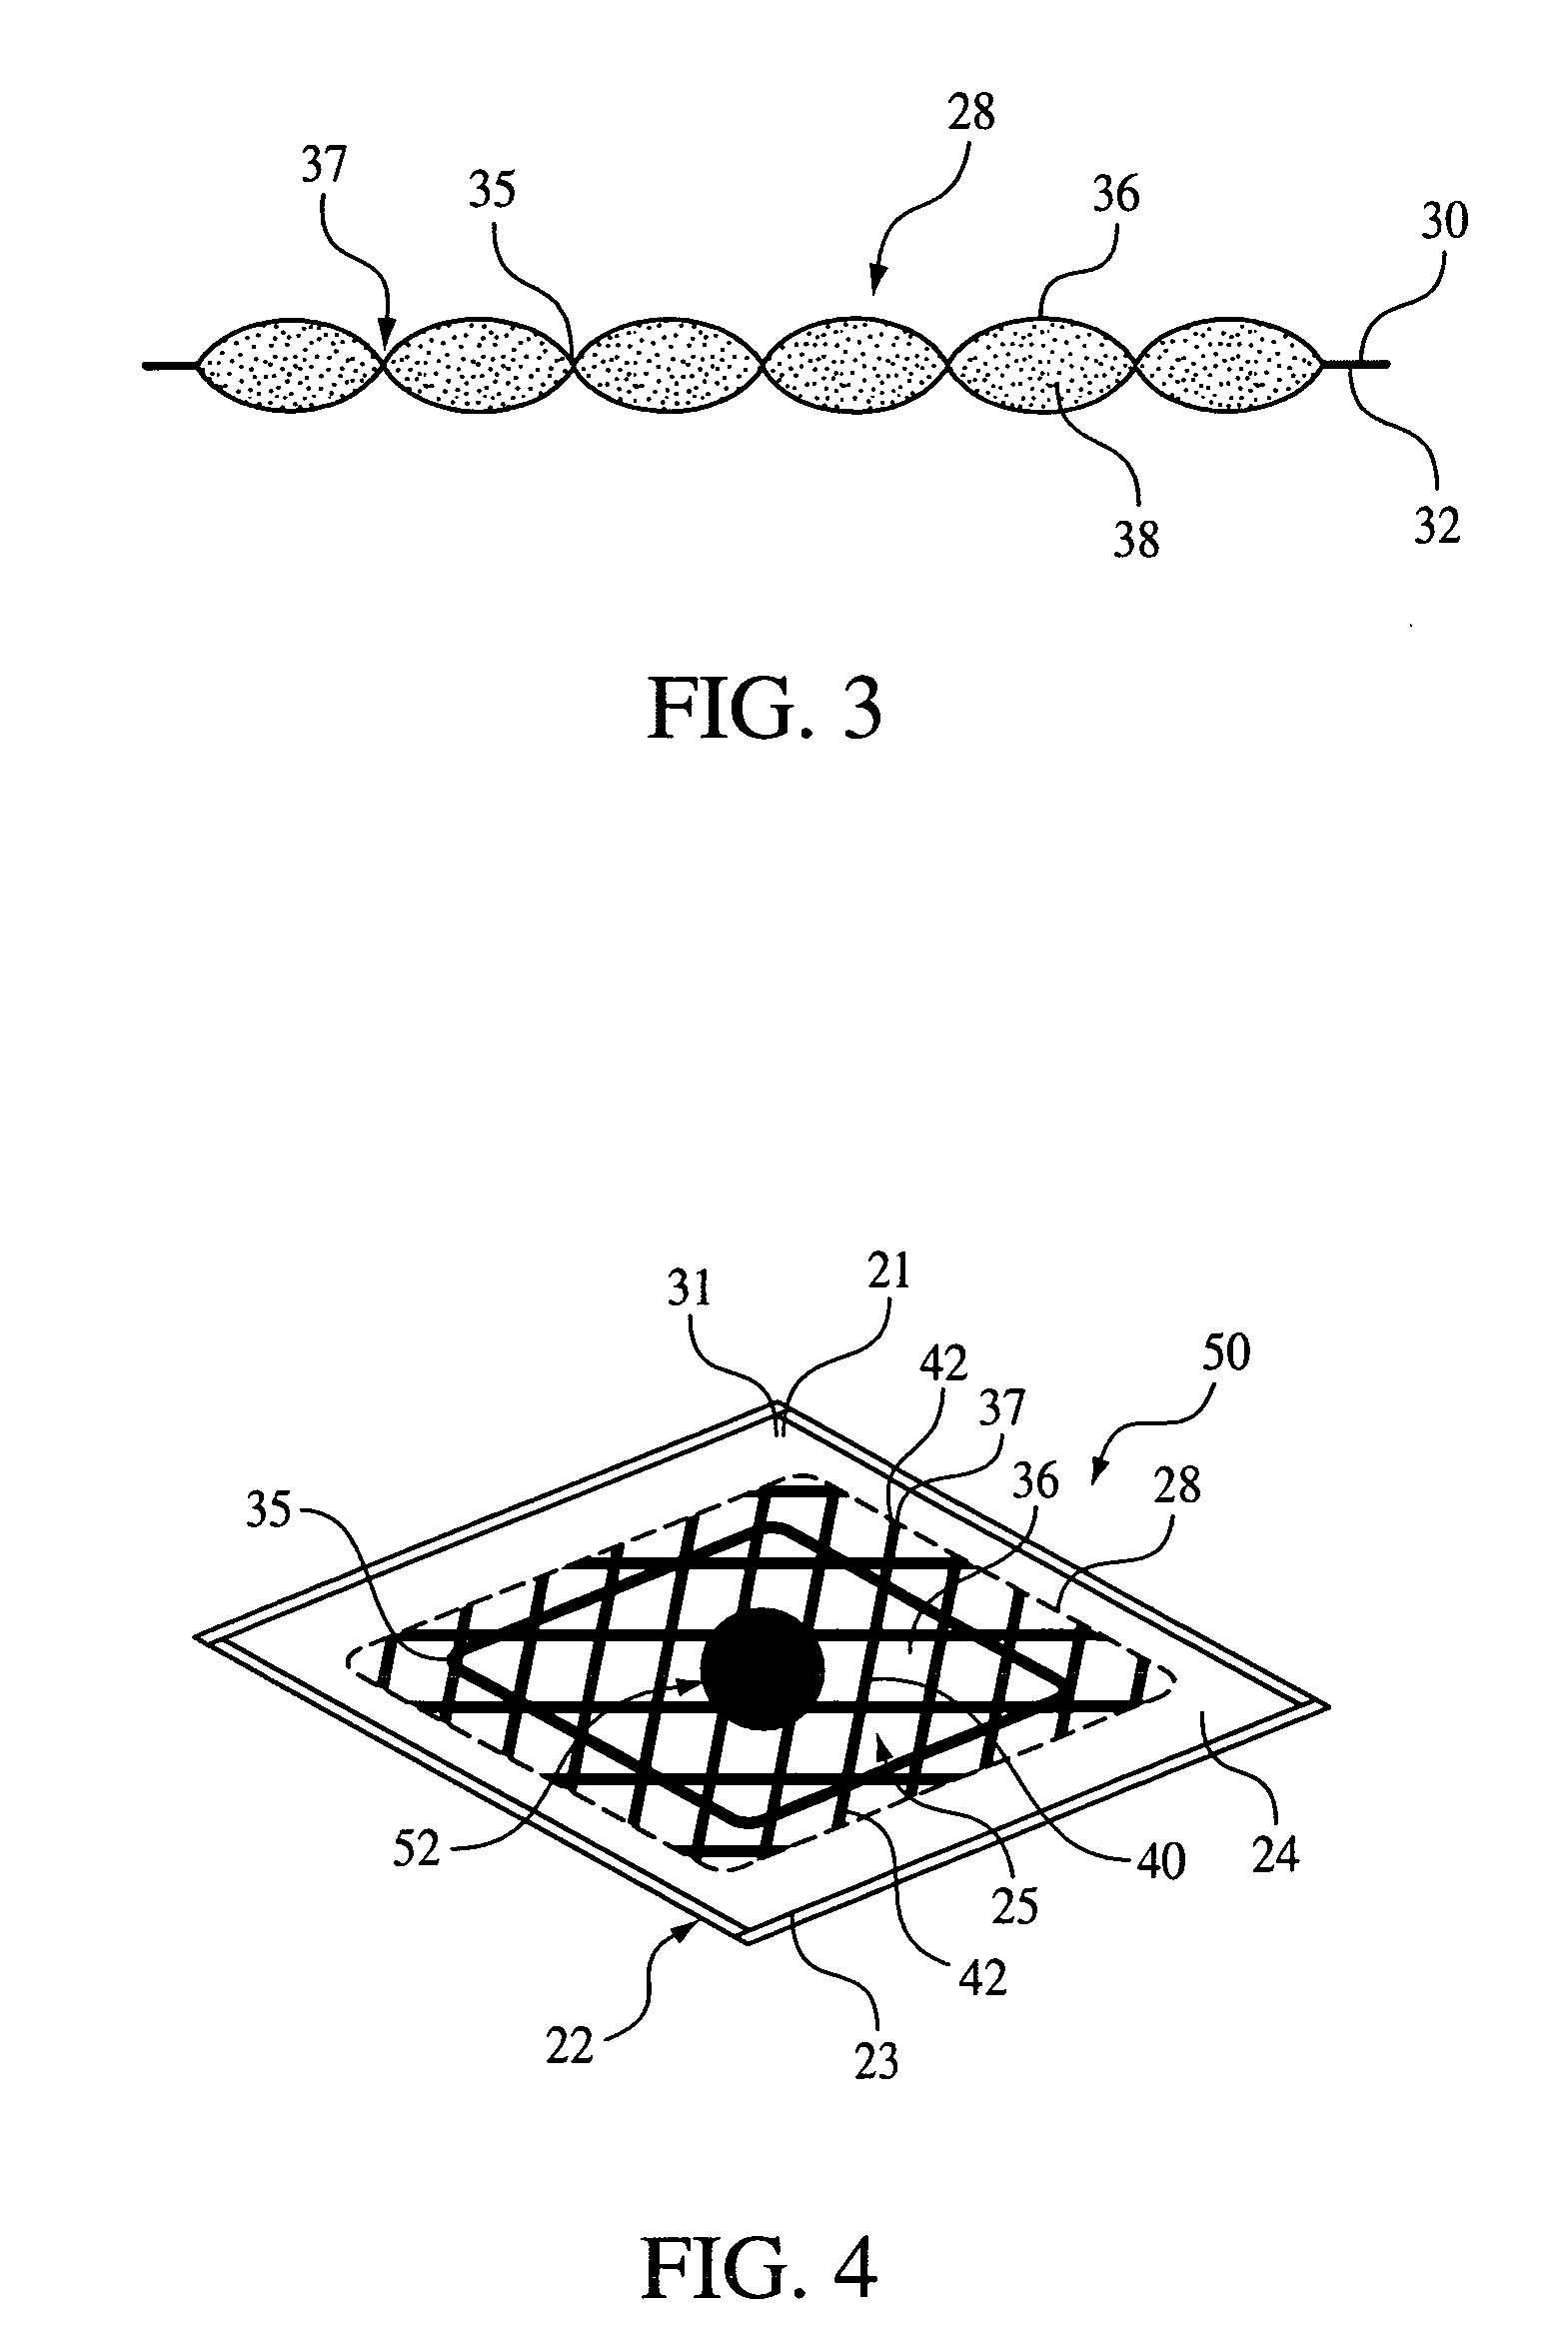 Device and method for collection and biodegradation of hydrocarbon fluids